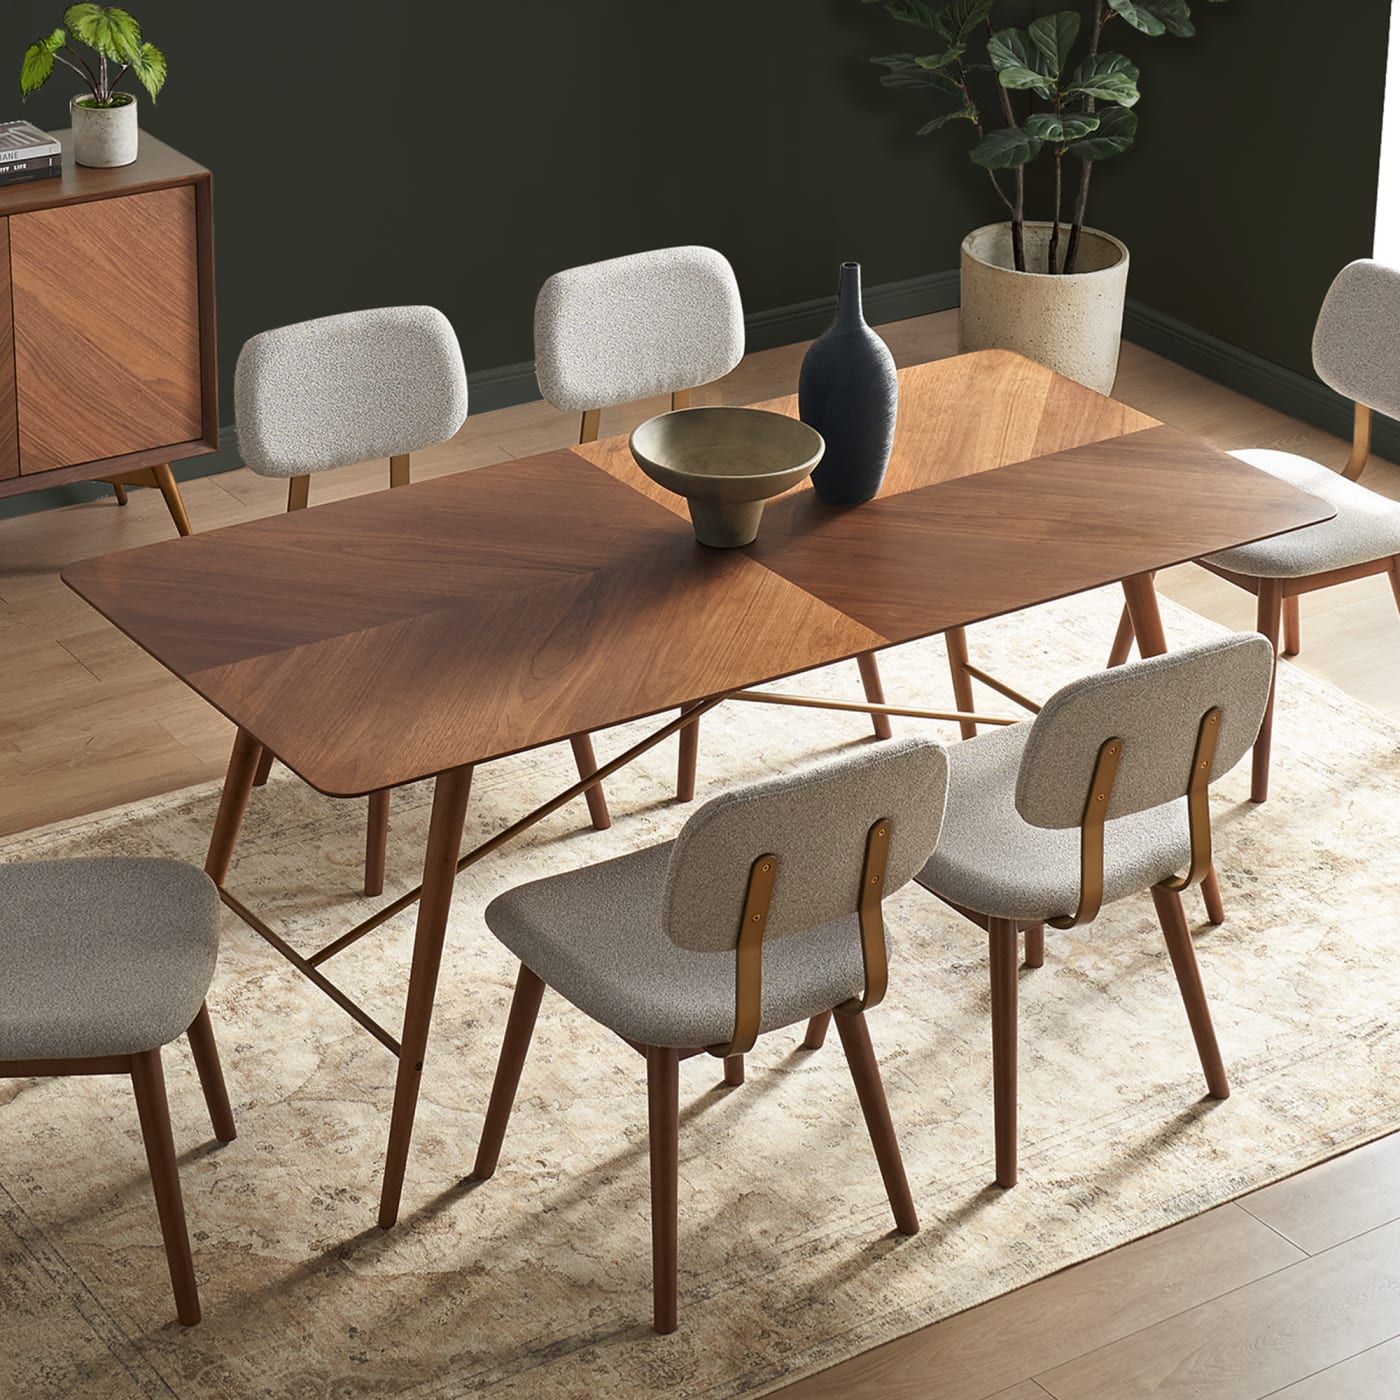 Lily Dining Table with 4 ChairsSet Sale | Castlery US